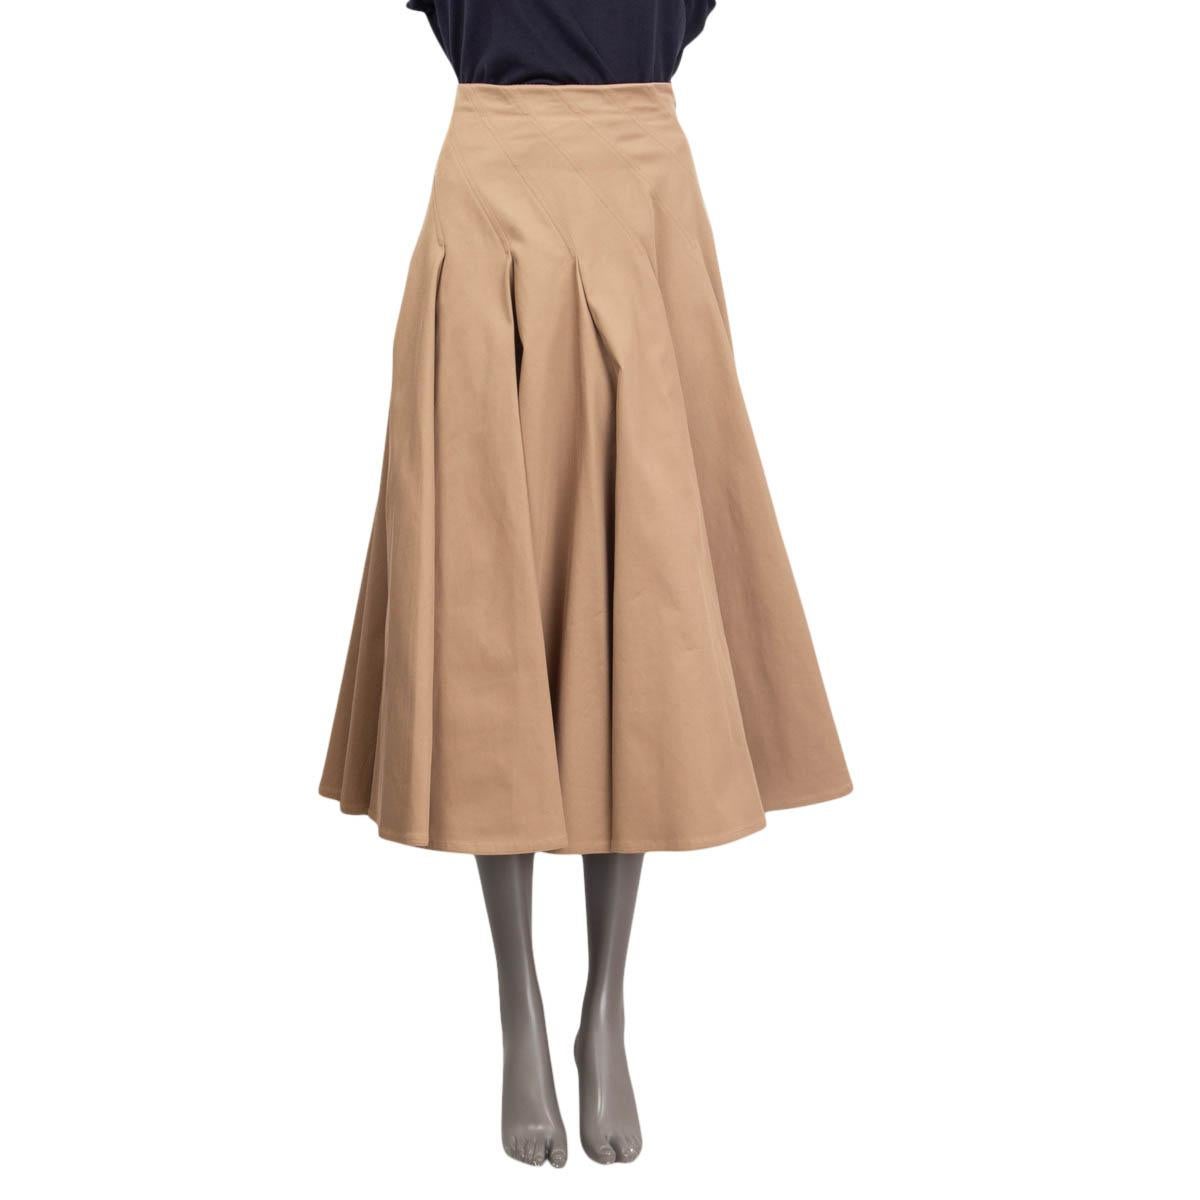 100% authentic Christian Dior diagonal pleated midi skirt in camel cotton (97%) and elastane (3%). Opens with diagonal concealed zipper and a hook on the back. Lined in camel silk (100%). Has been worn and is in excellent